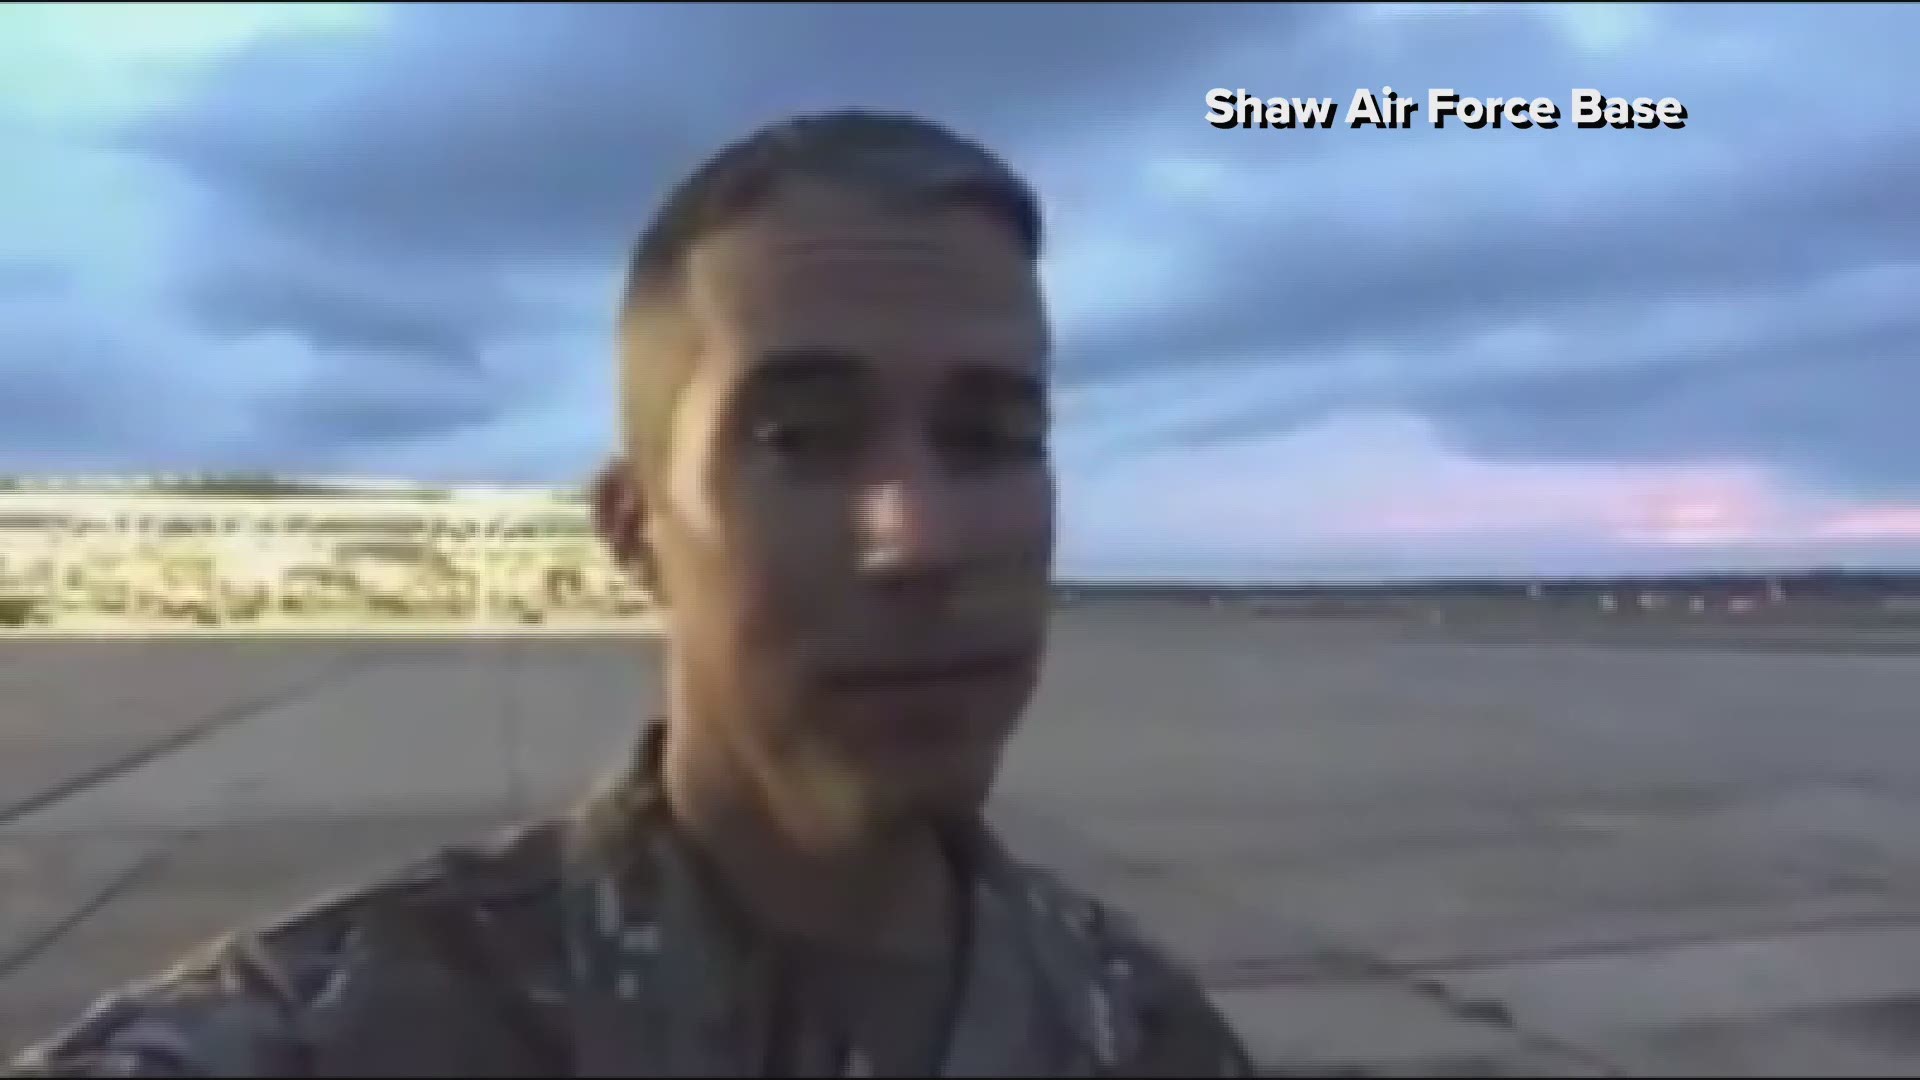 Shaw Air Force base is saying one of their airmen has died, at least the fourth death on the base this year.  20th Fighter Wing Commander Col. Derek O'Malley confirmed in a post on the base's Facebook page Wednesday the news, saying the person passed away Tuesday.